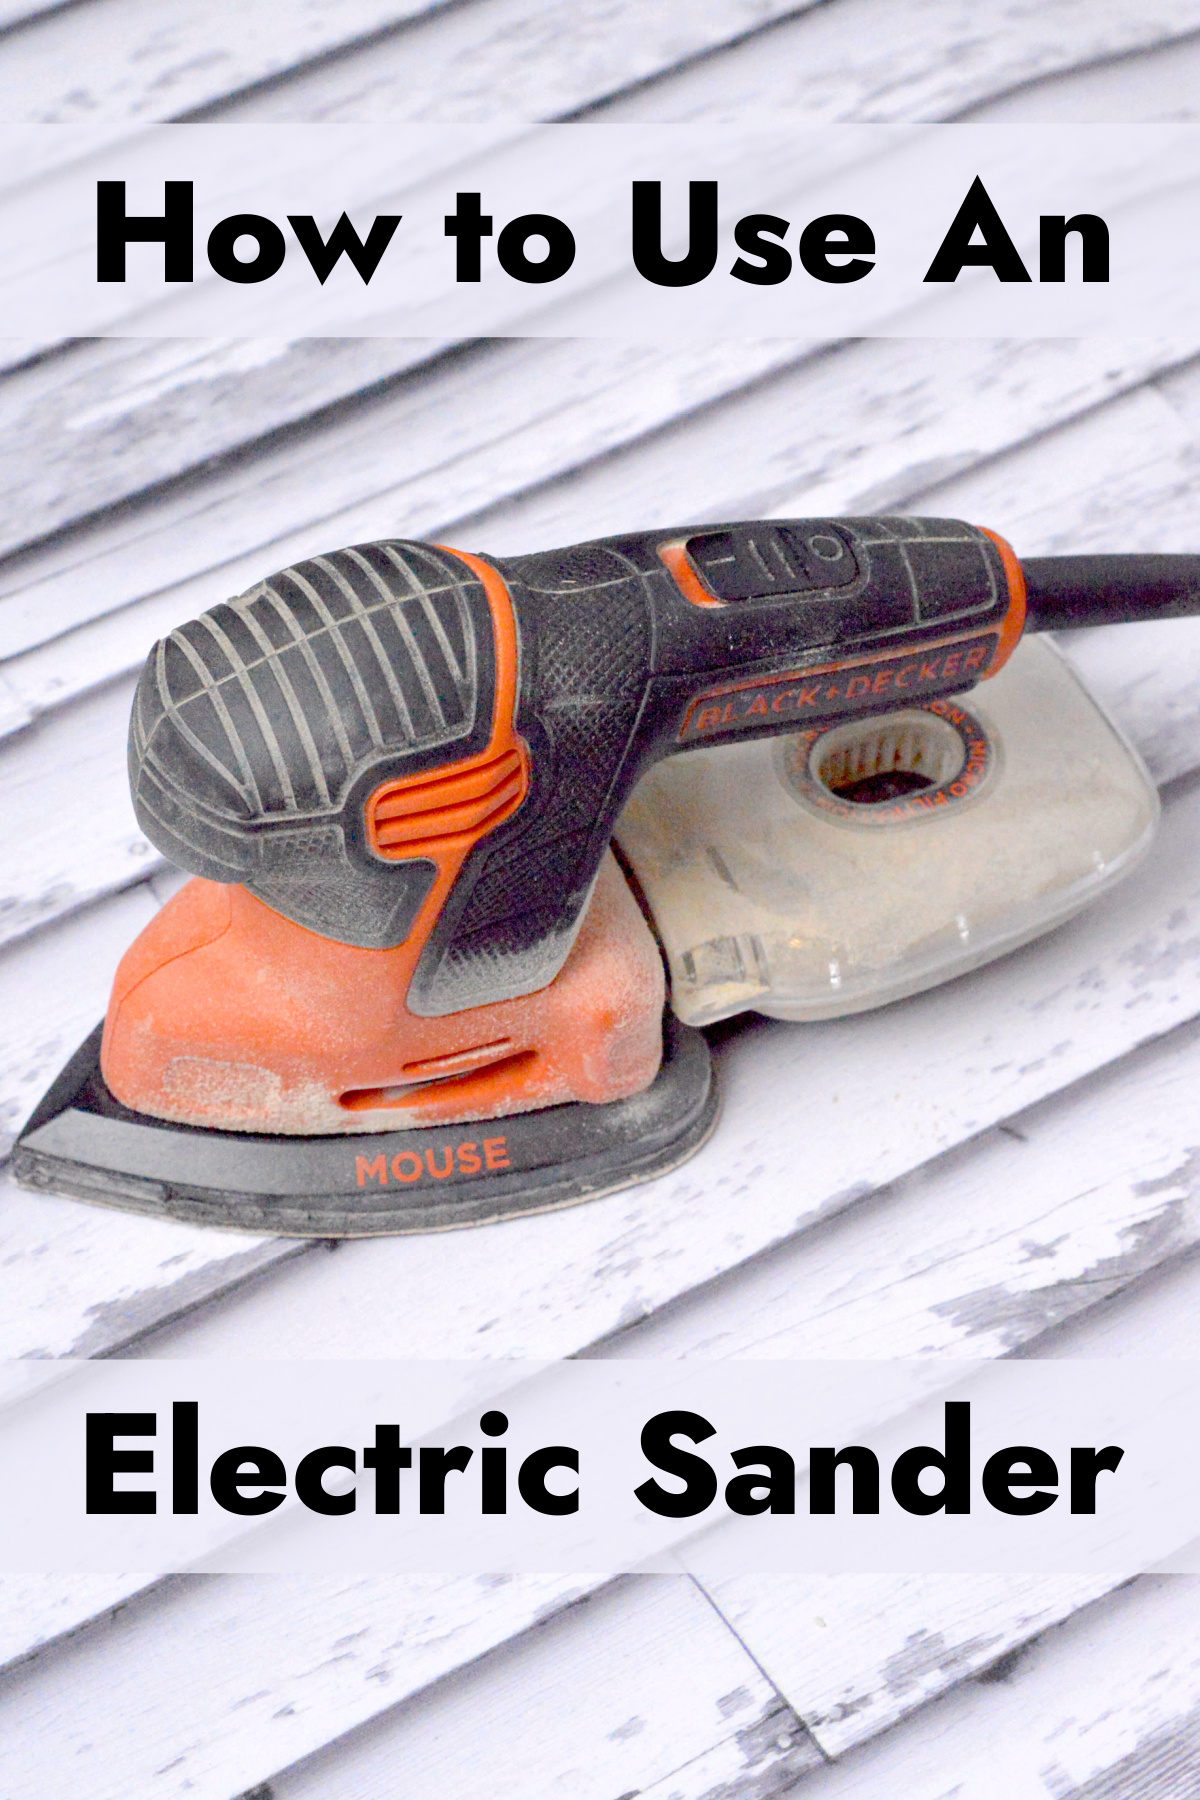 How to Use a Manual Sander to Smooth Out Small Projects